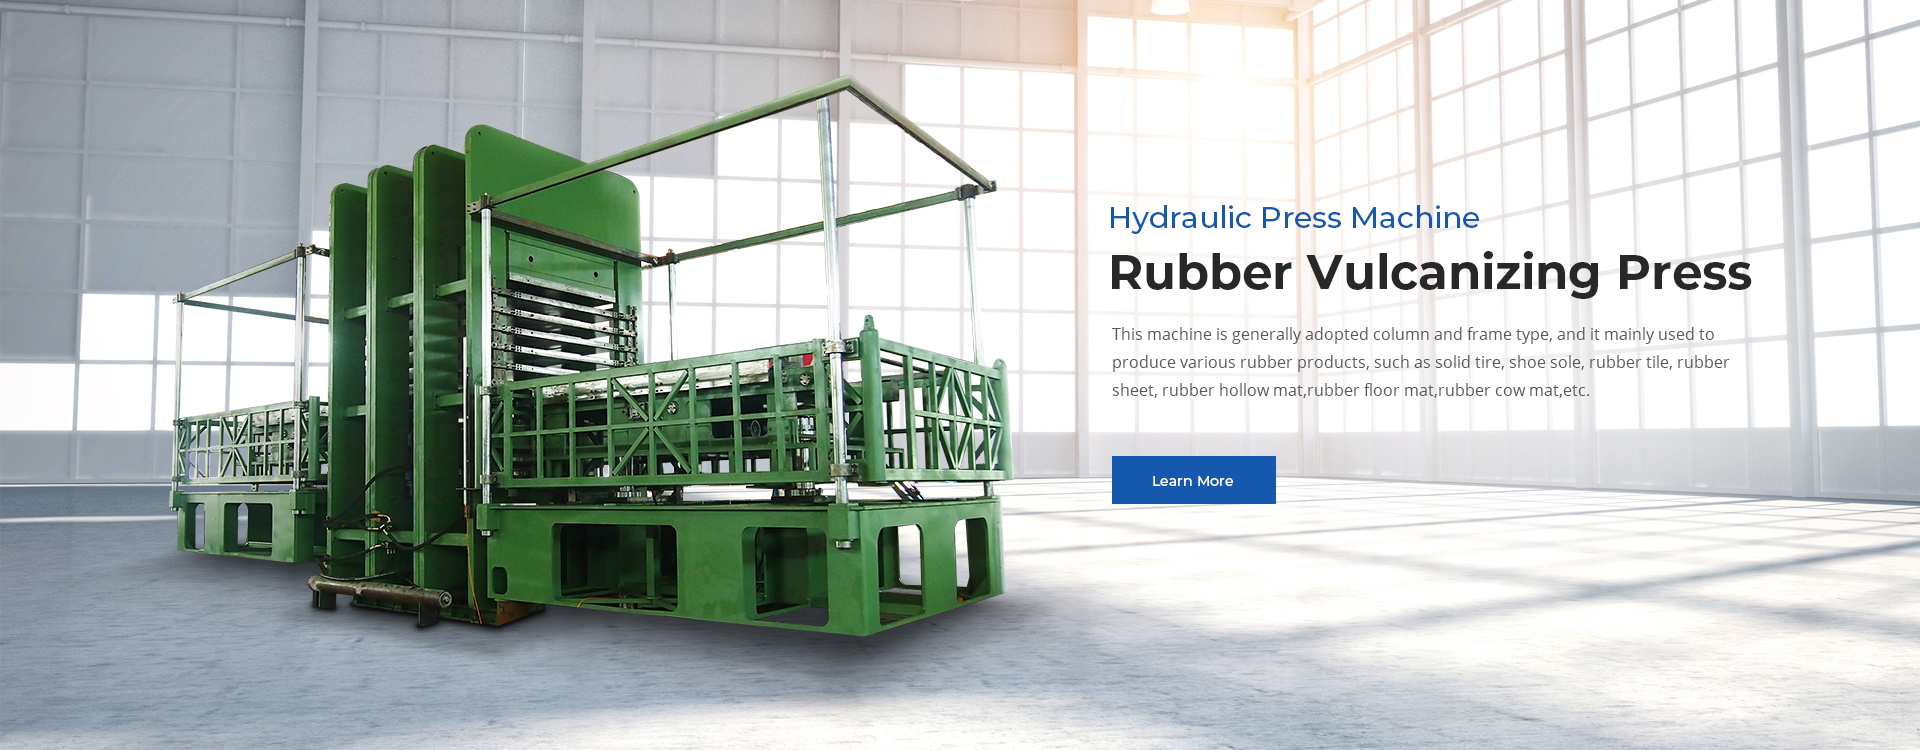 Medium-sized Plate Rubber Vulcanizing Press for Lab